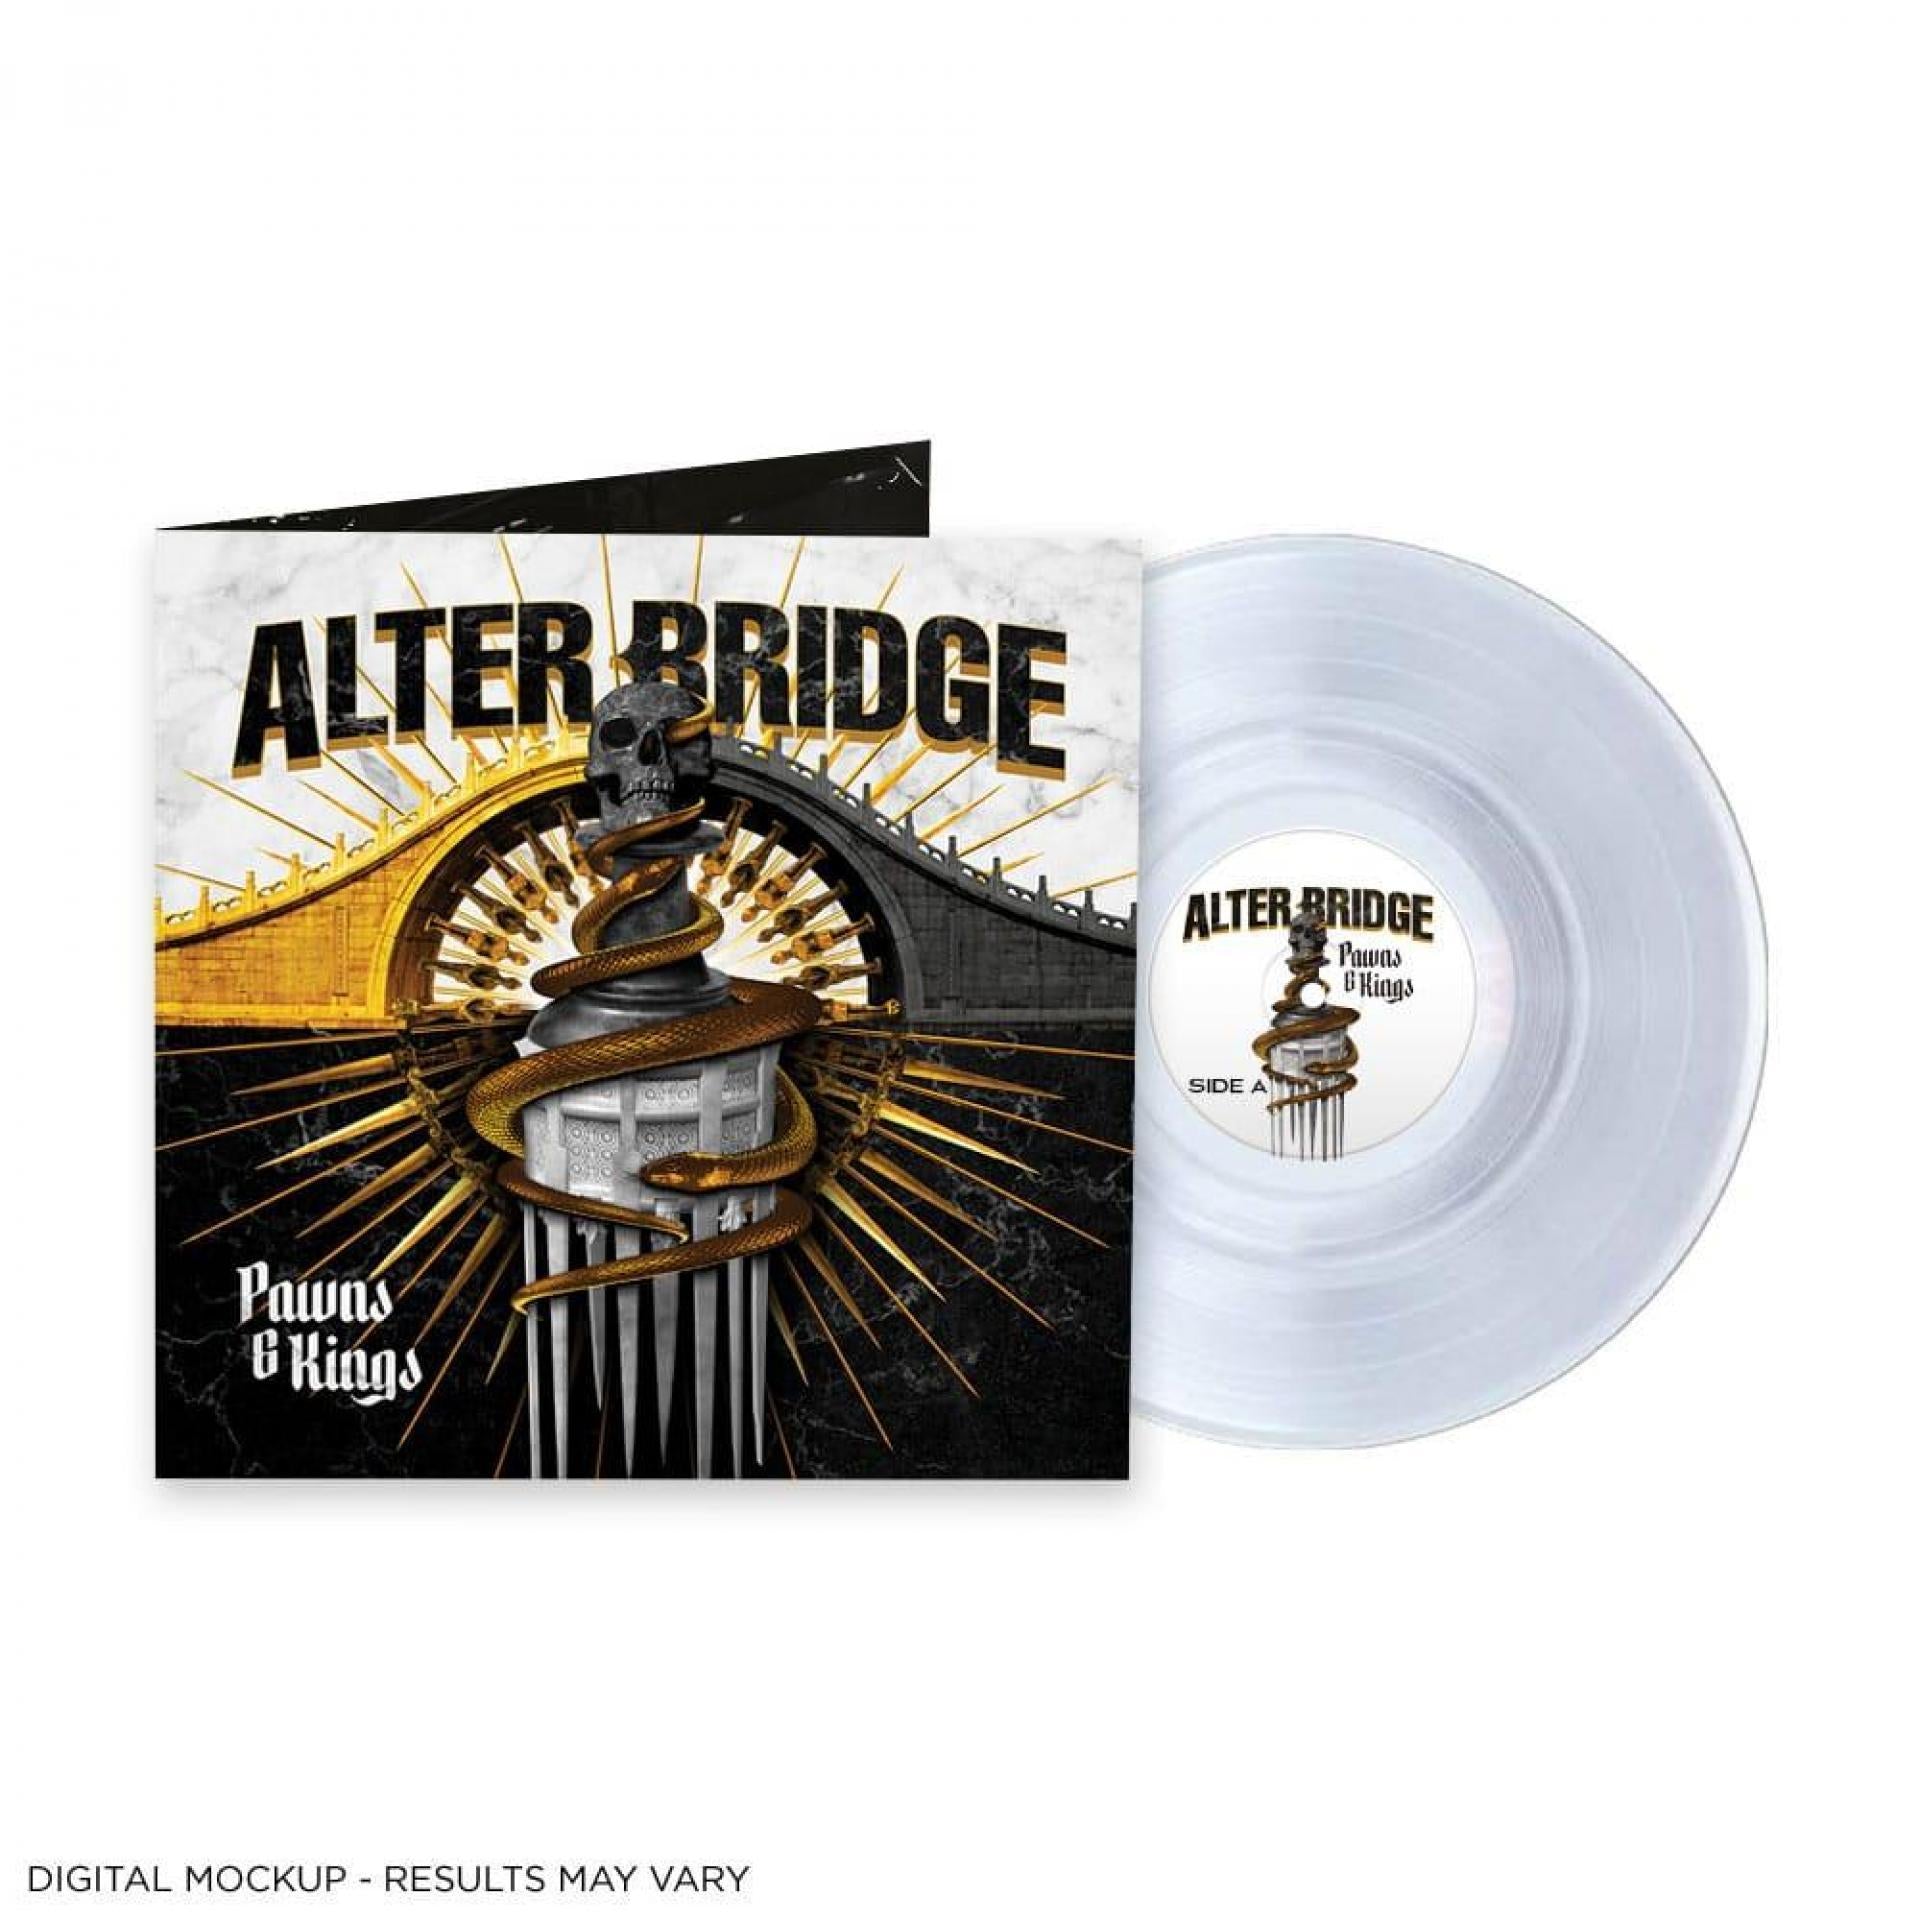 Alter Bridge - Behind The Track (Silver Tongue) 